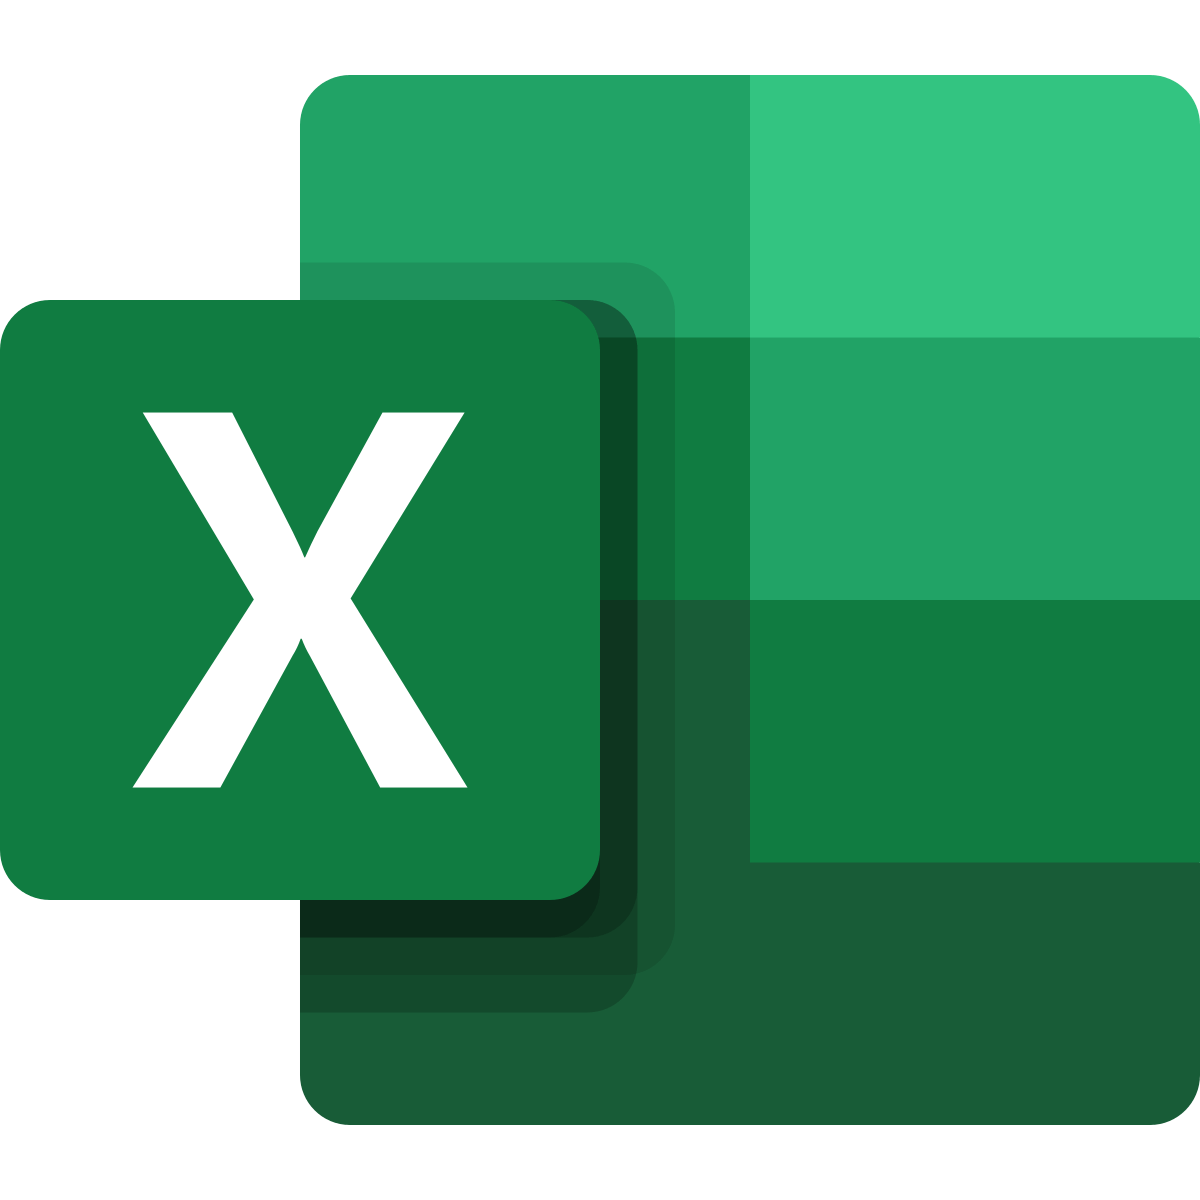 Microsoft Excel review